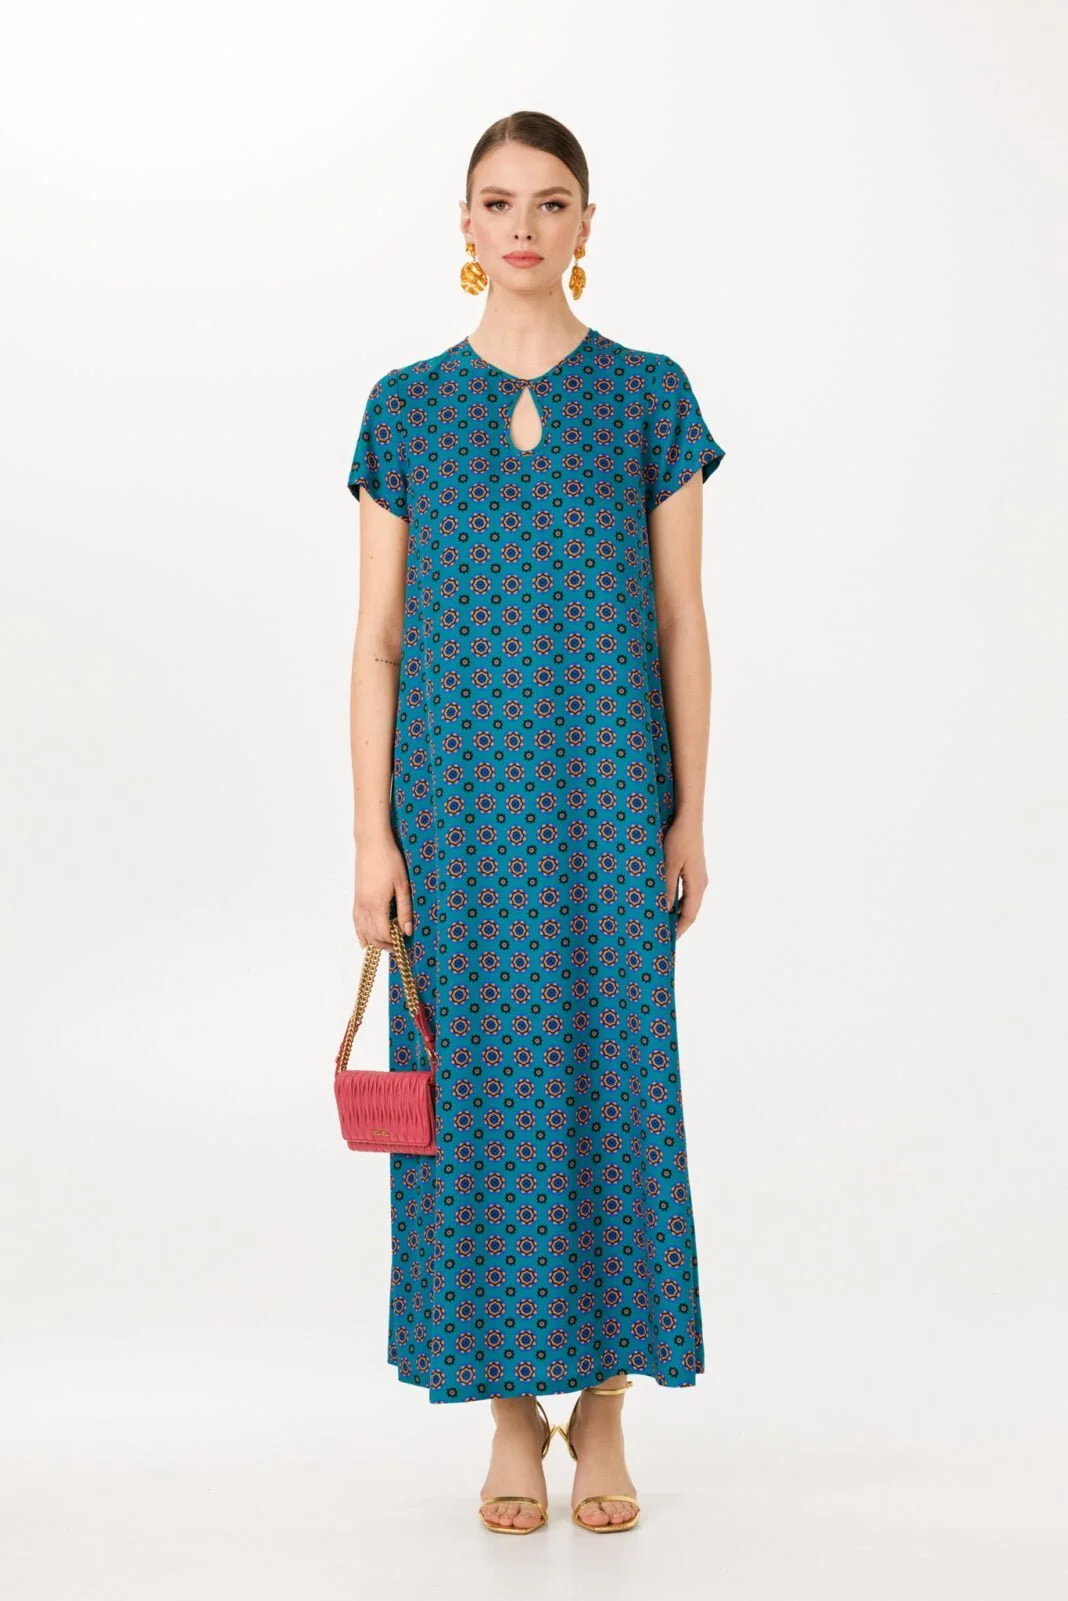 Turquoise Maxi Length Loose Fit Kaftan Dress - Ideal for Beach Vacation and Summer Evenings